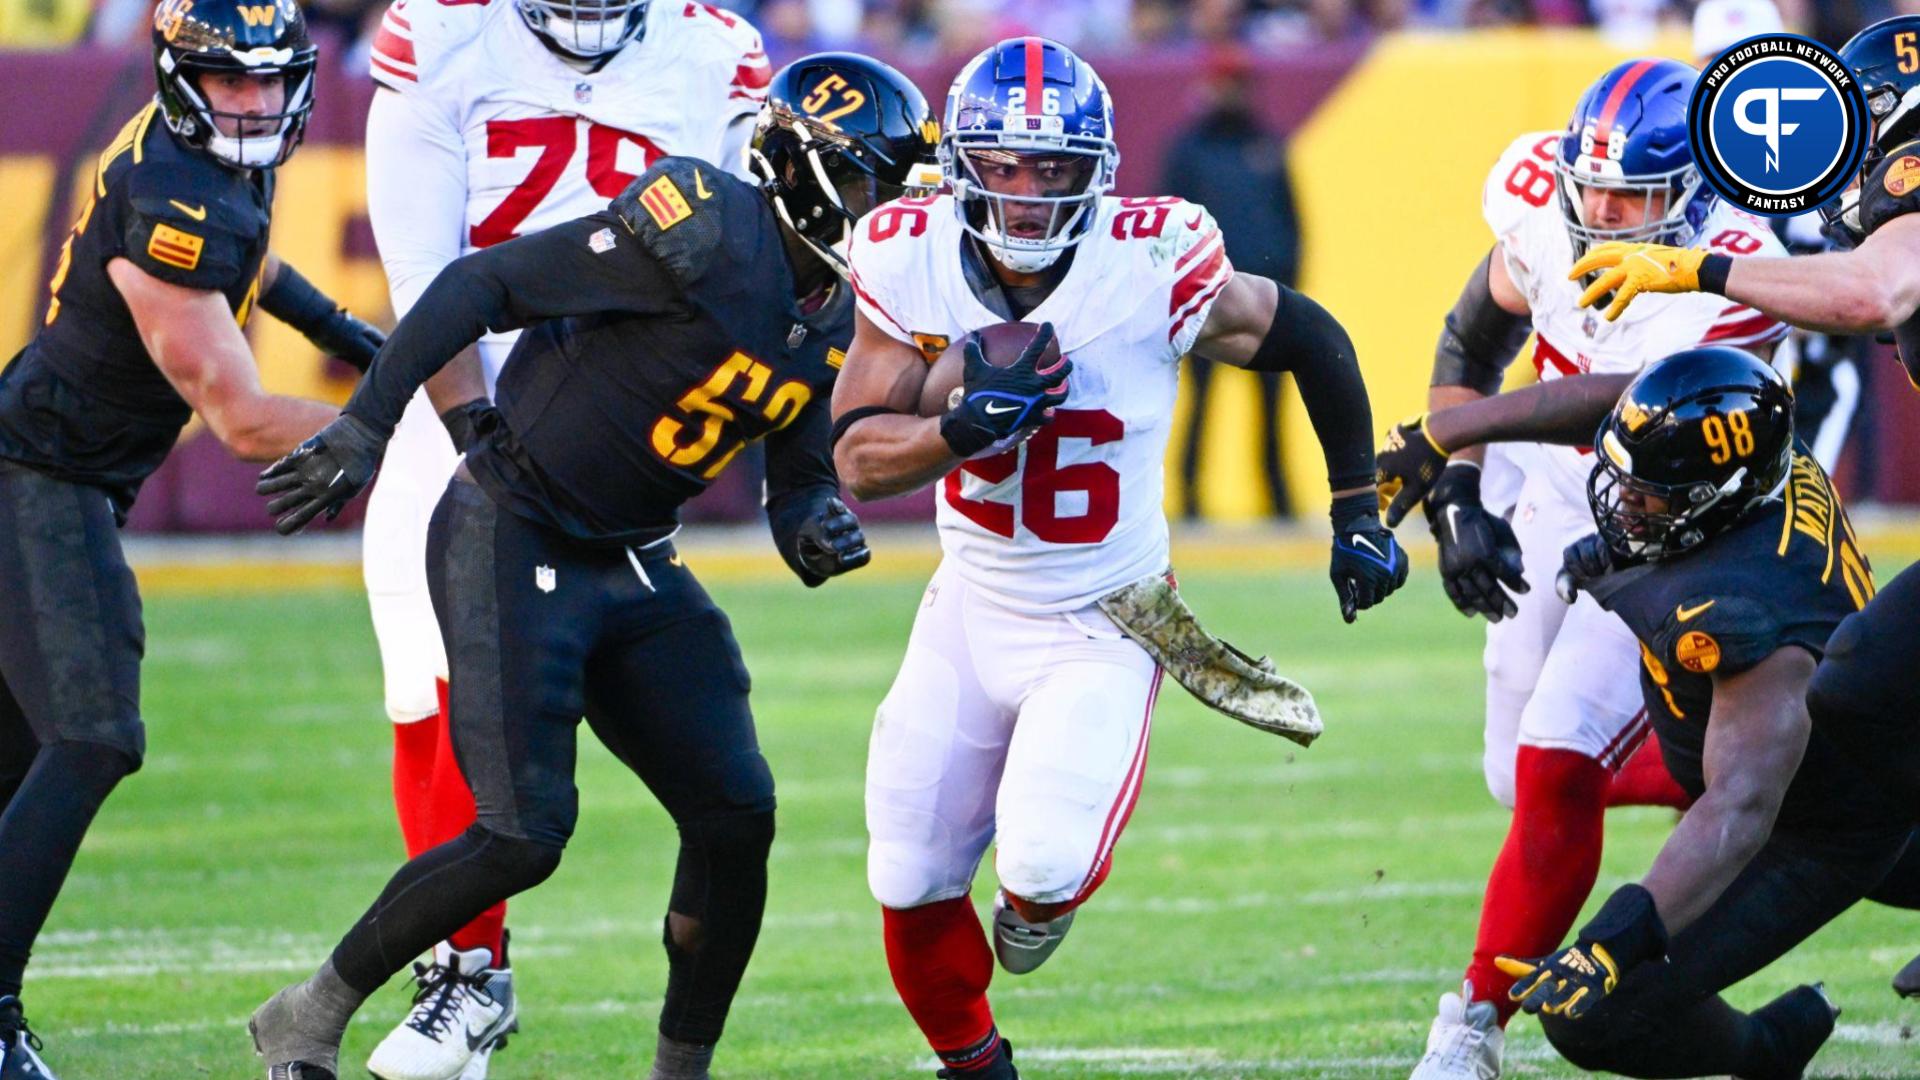 New York Giants running back Saquon Barkley (26) carries the ball against the Washington Commanders during the second half at FedExField.